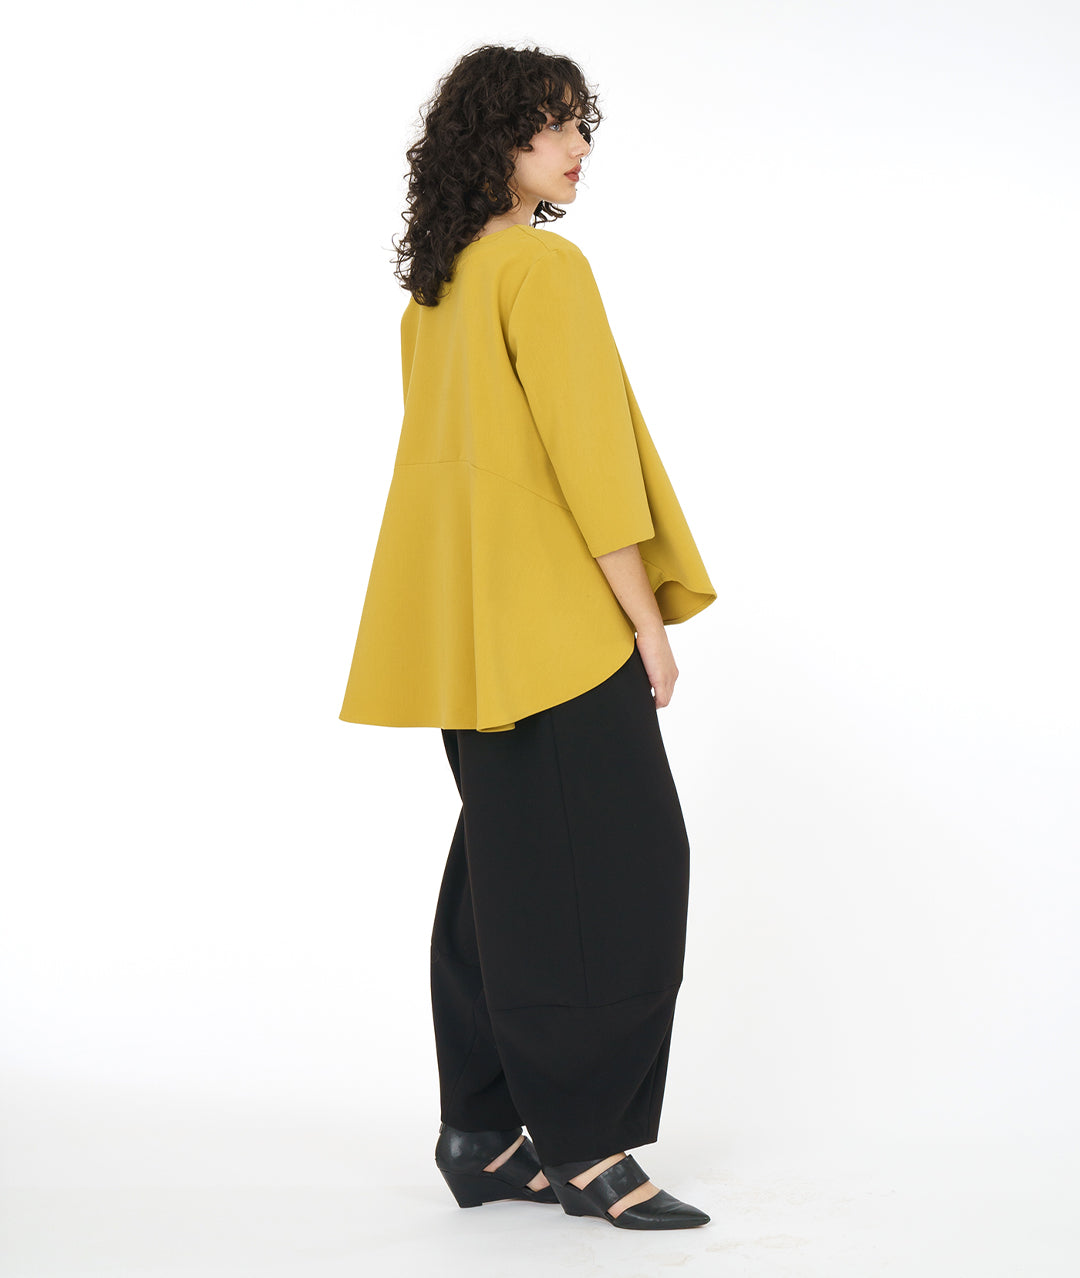 model in a high-low hemmed gold pullover top, with a black pant with a full leg tapering down at the ankle